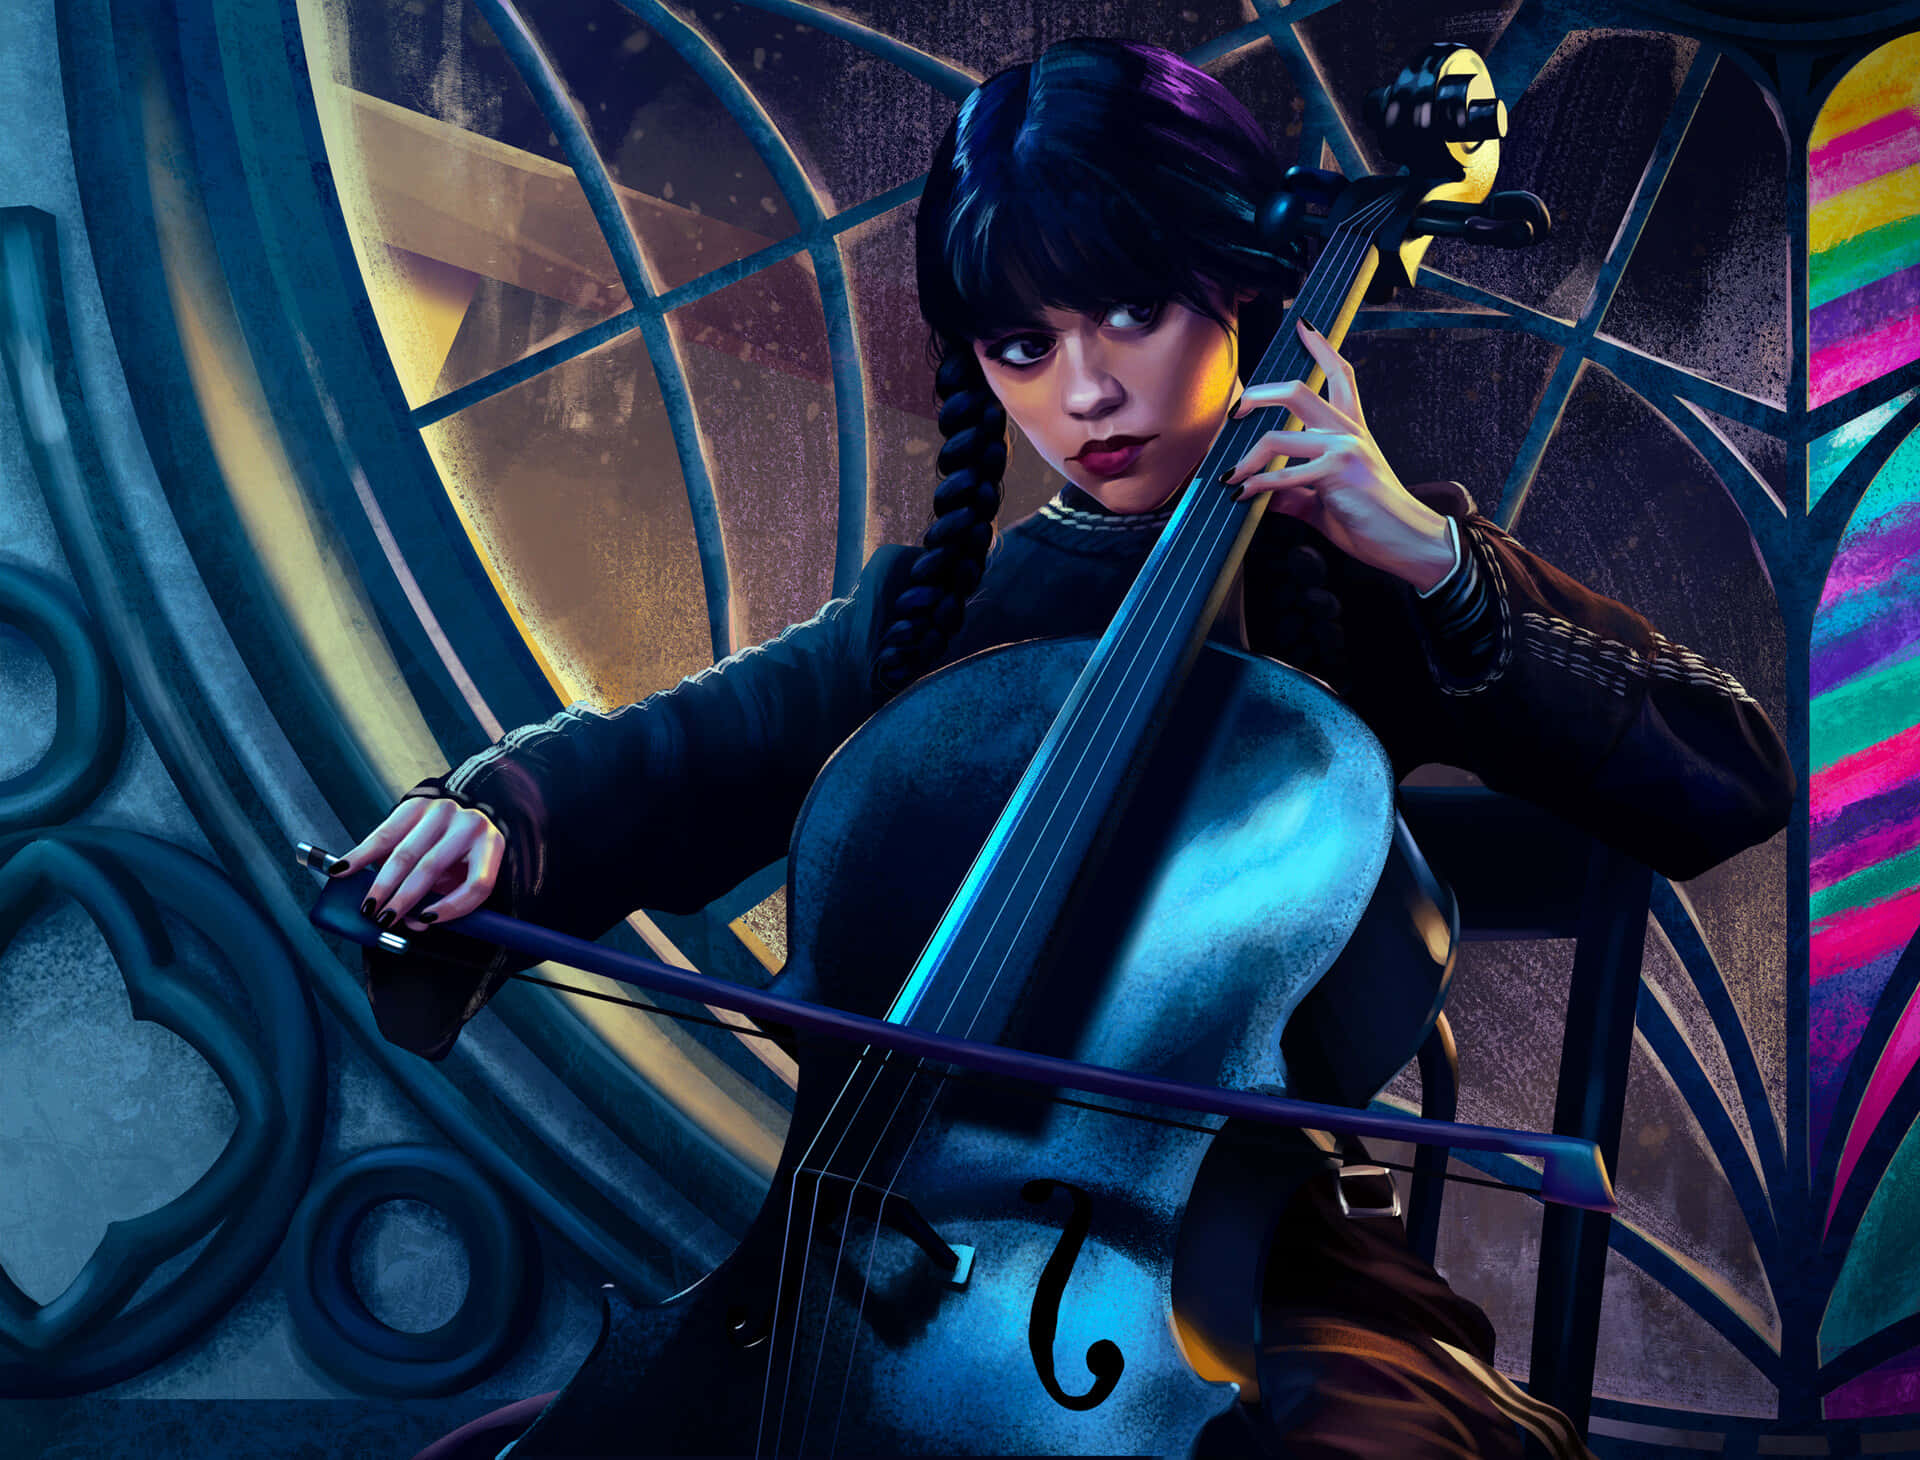 Wednesday_ Addams_ Playing_ Cello_ Artwork Wallpaper